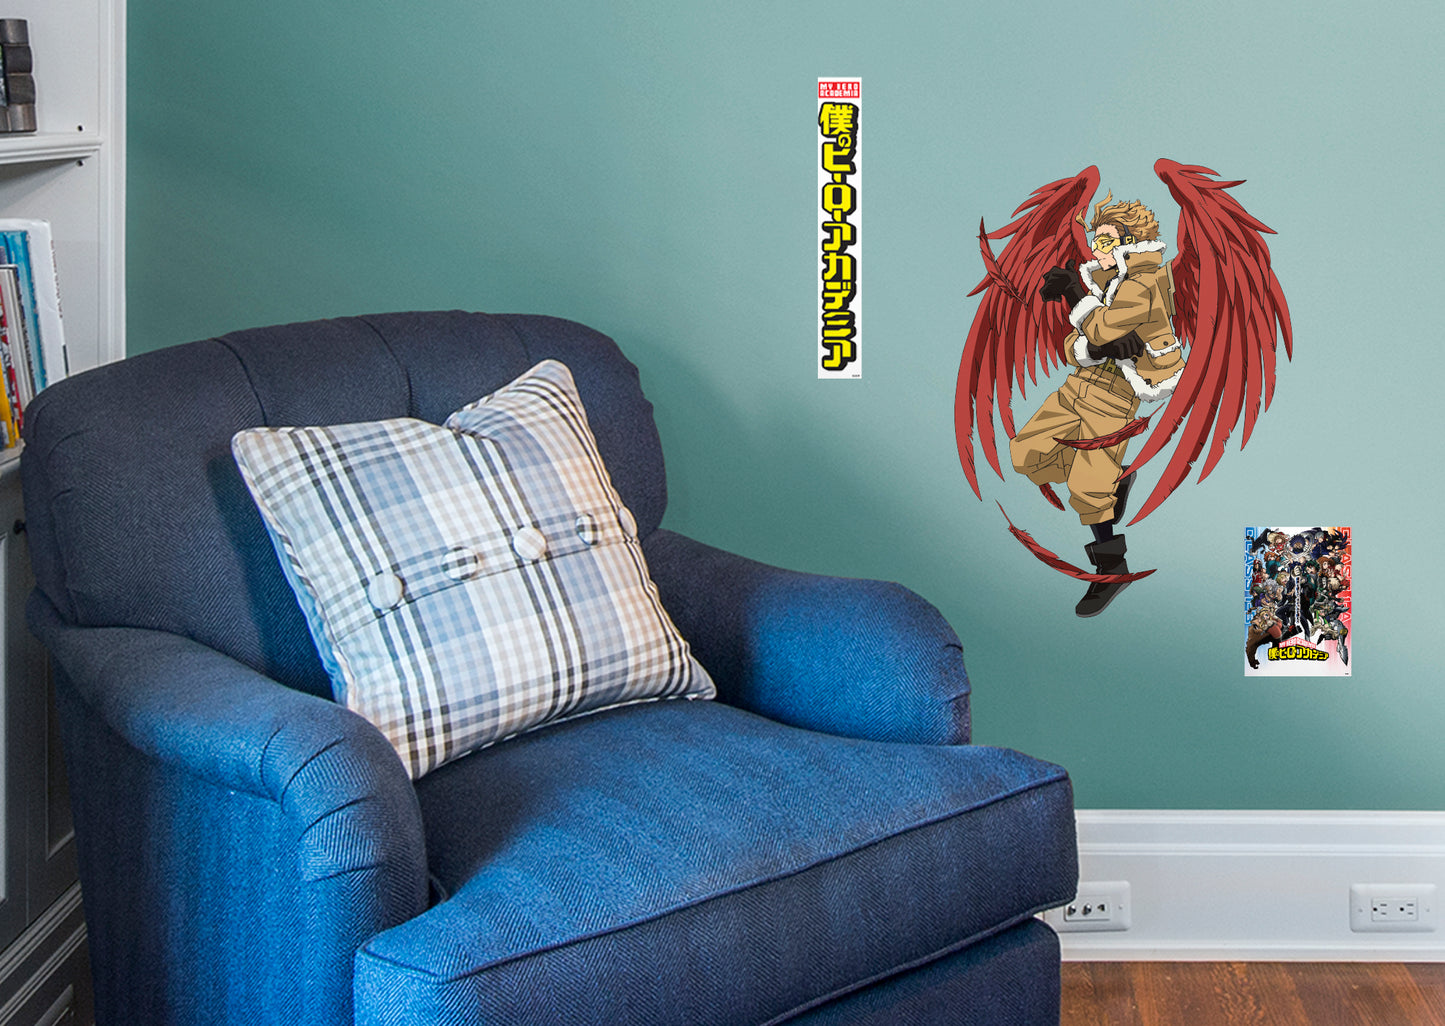 My Hero Academia: HAWKS RealBig - Officially Licensed Funimation Removable Adhesive Decal